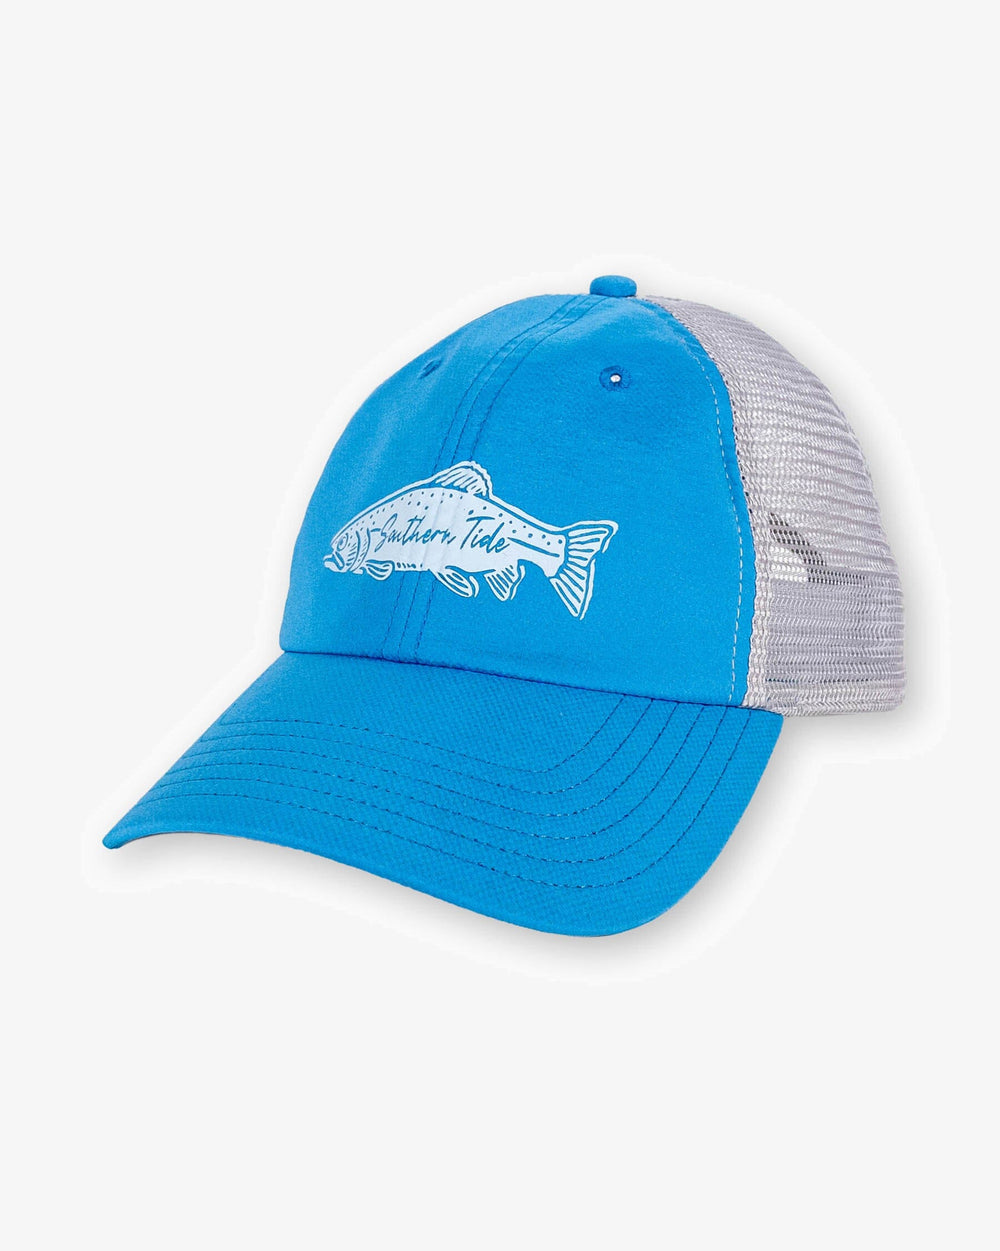 The front view of the Southern Tide Youth Flyday Trucker Hat by Southern Tide - Blue